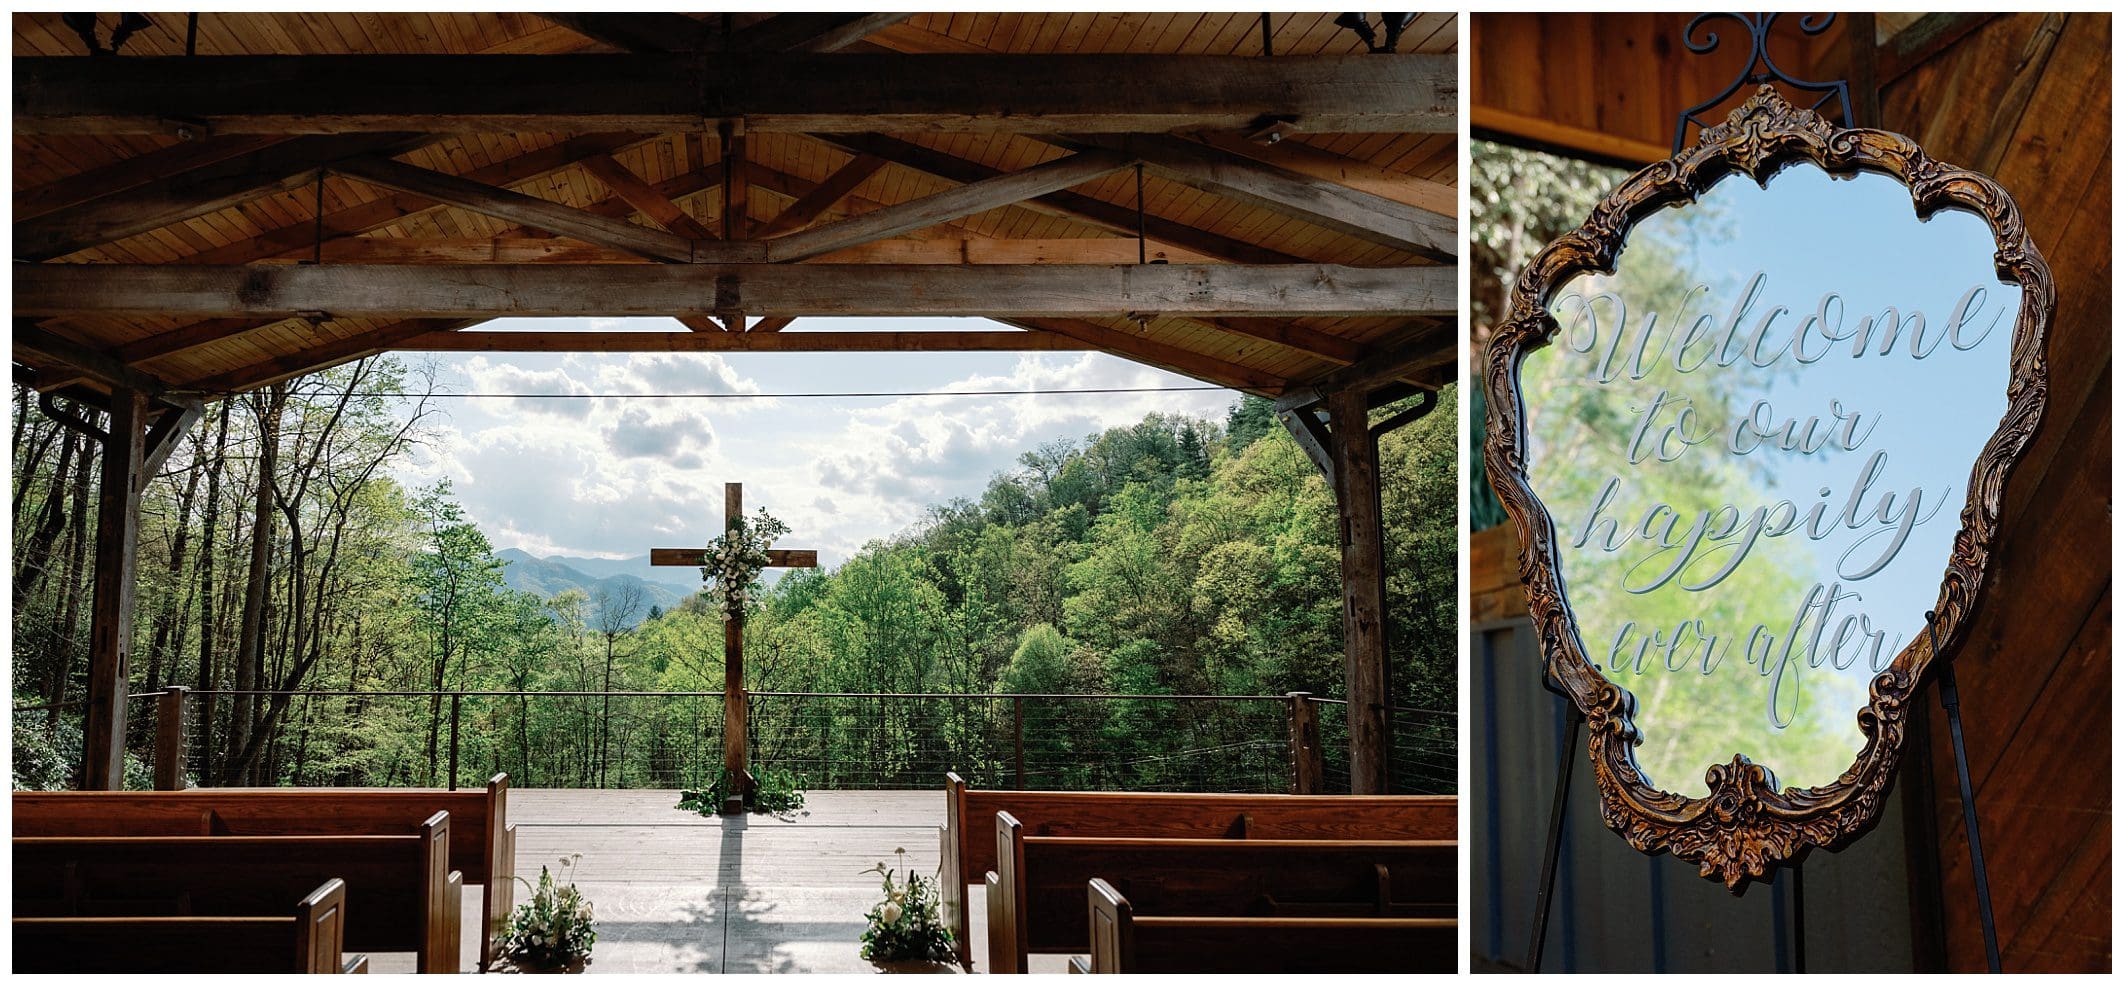 Left: wooden chapel with open walls overlooking a forested mountain. right: "welcome to our happily ever after" sign in an ornate frame reflecting trees.